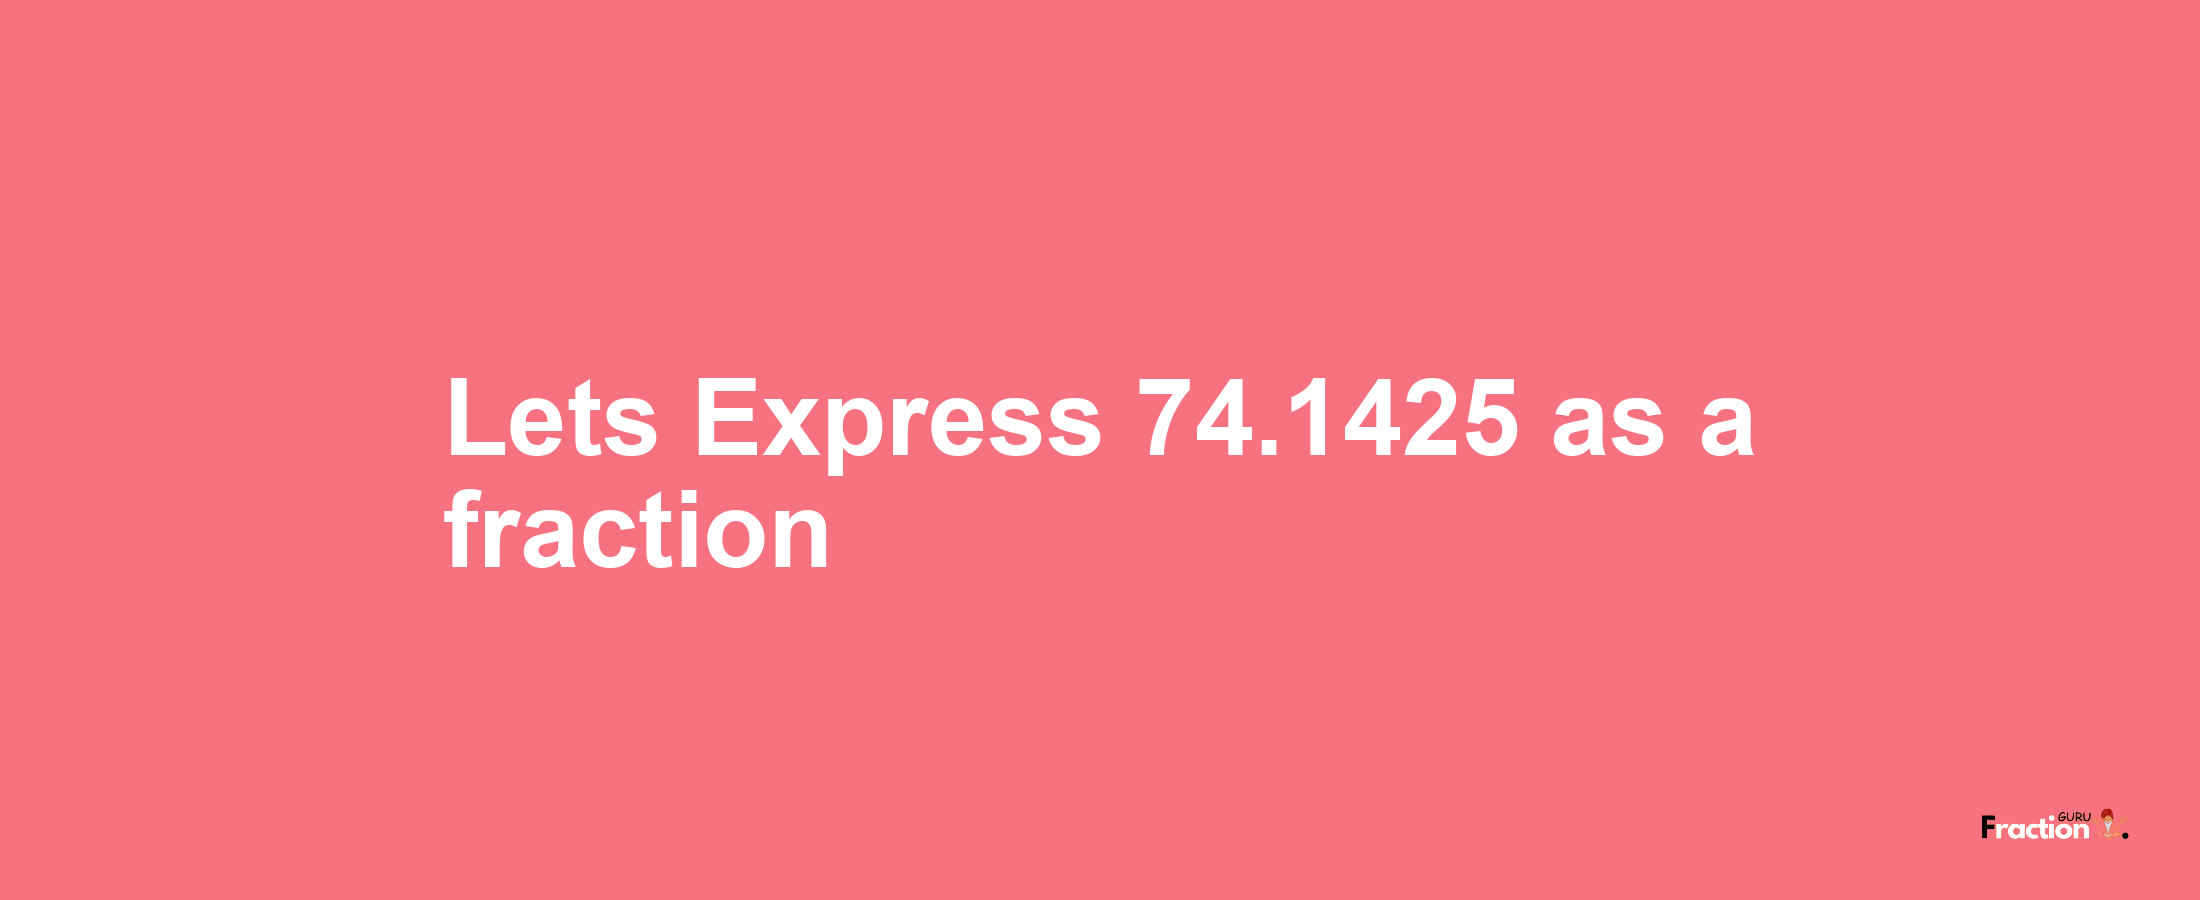 Lets Express 74.1425 as afraction